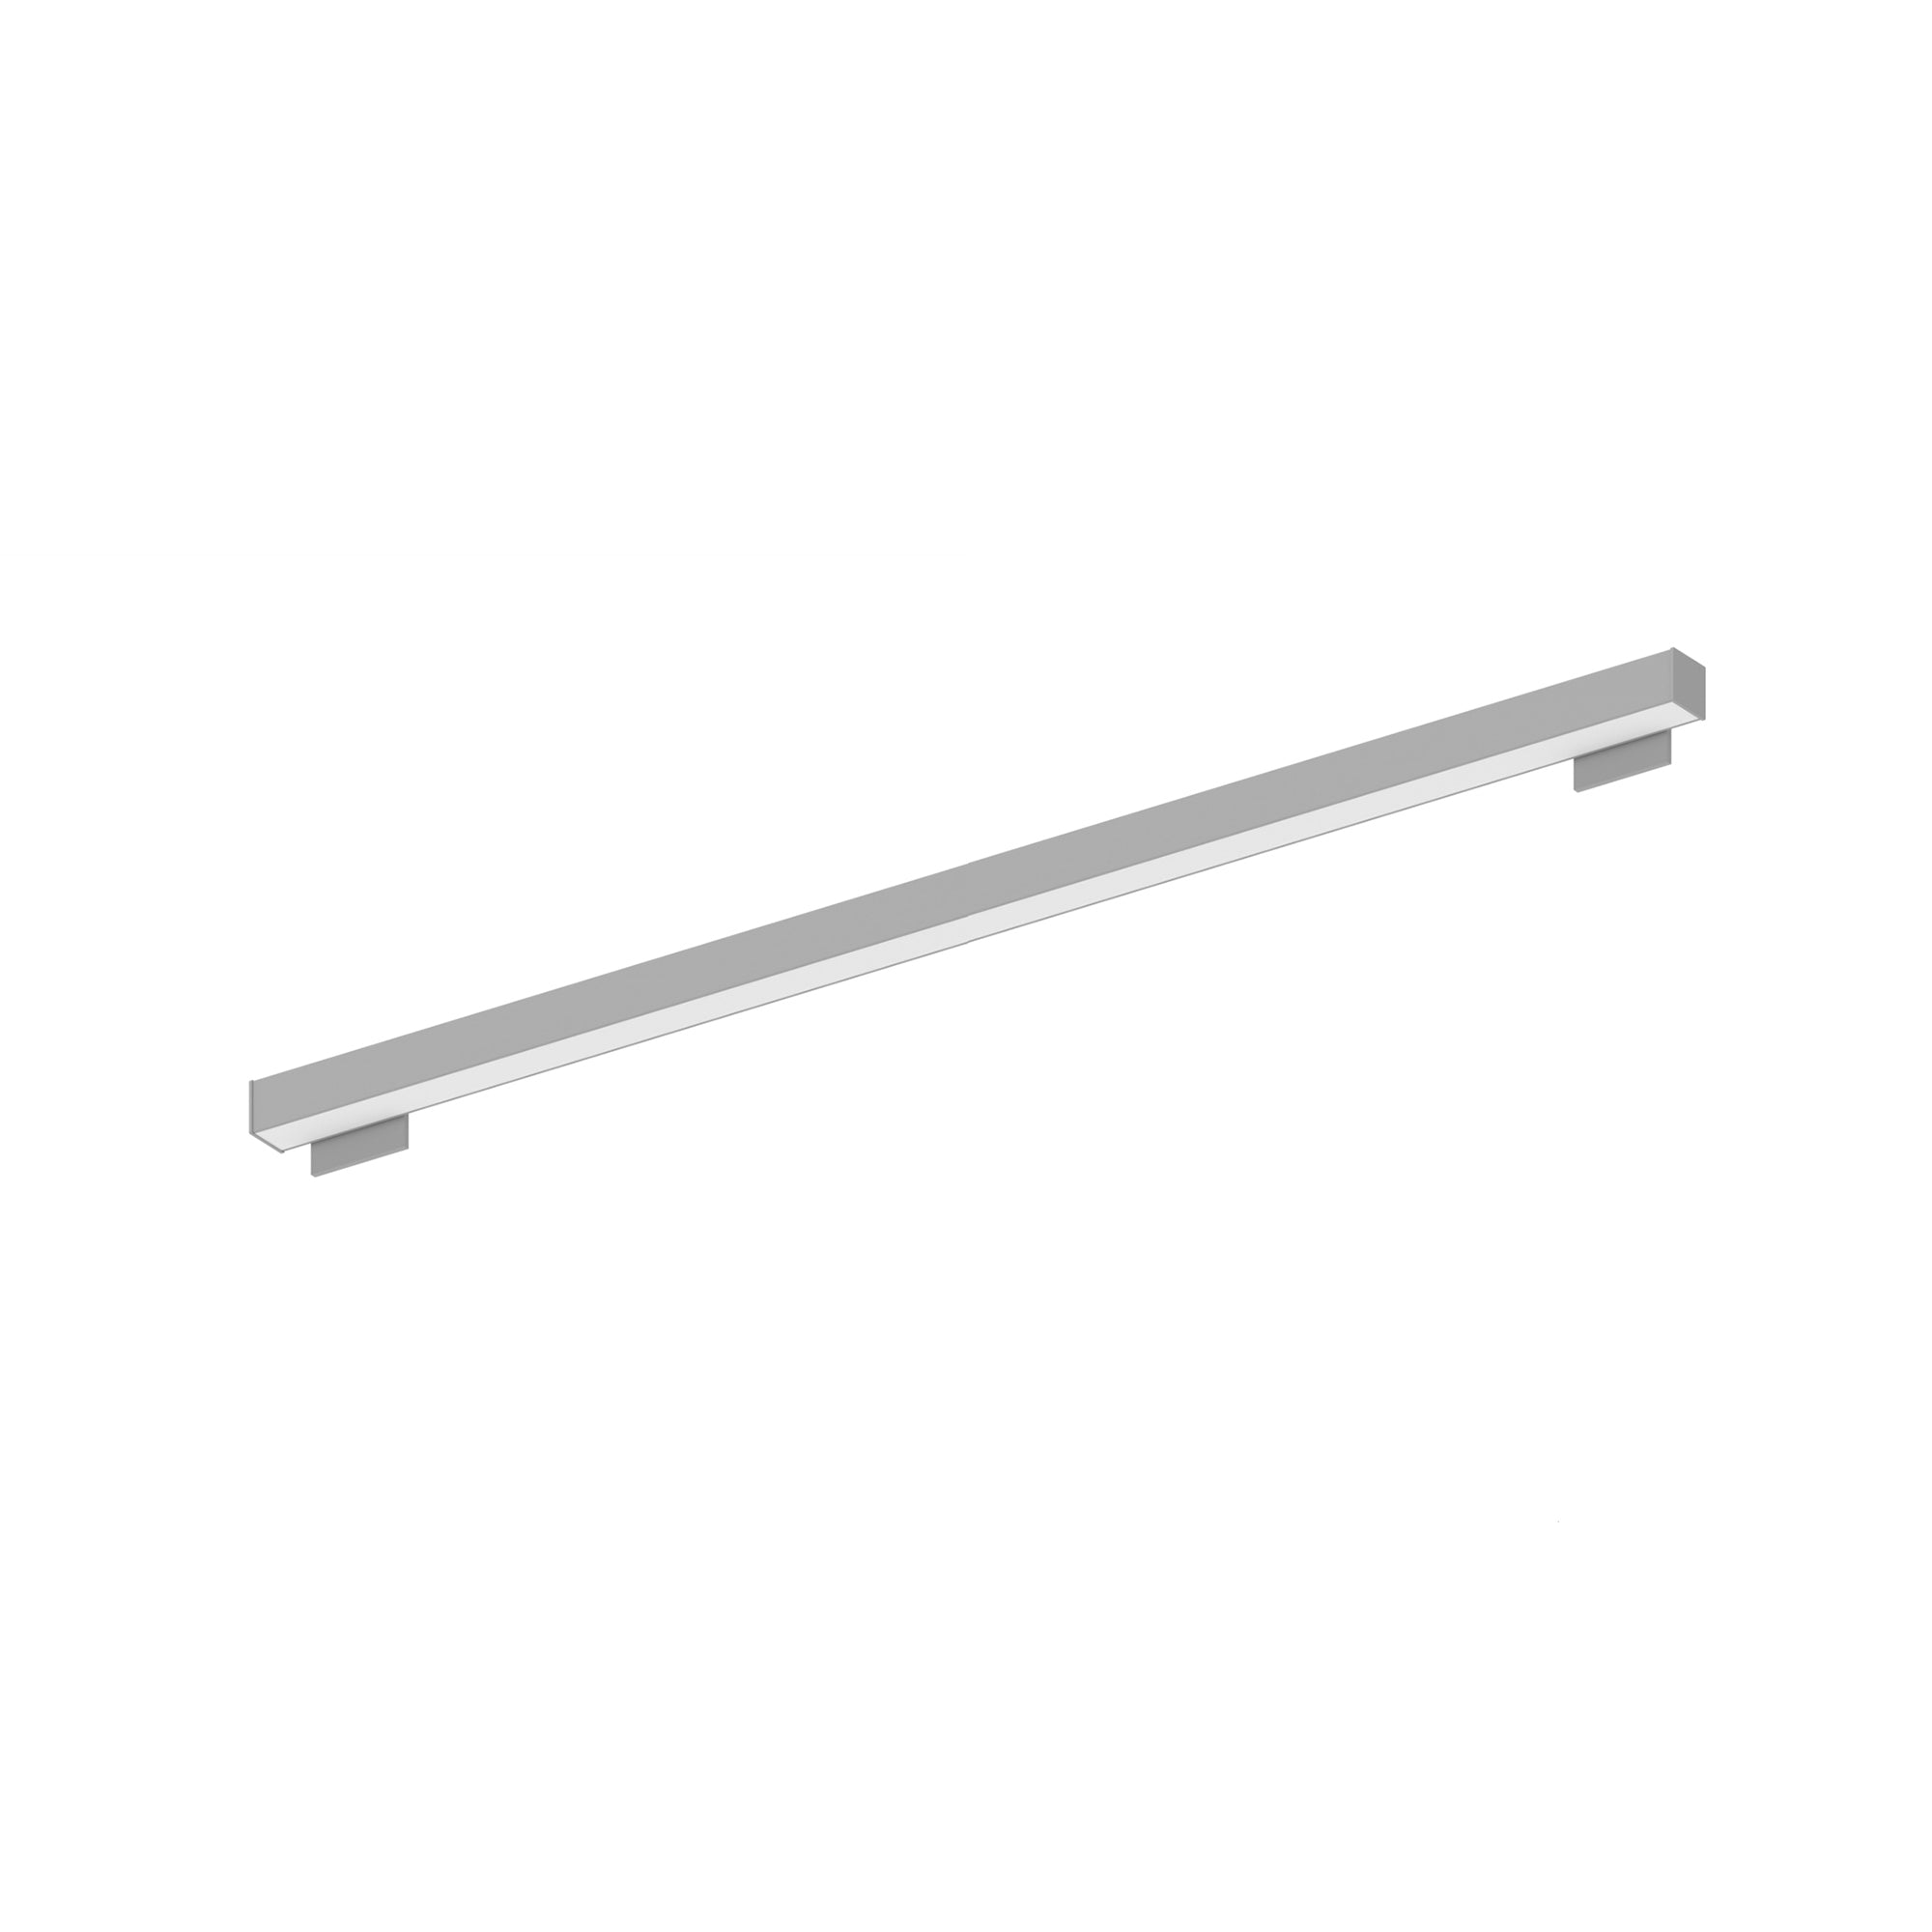 Nora Lighting NWLIN-81040A/L4P-R4 - Linear - 8' L-Line LED Wall Mount Linear, 8400lm / 4000K, 4 Inchx4 Inch Left Plate & 4 Inchx4 Inch Right Plate, Left Power Feed, Aluminum Finish